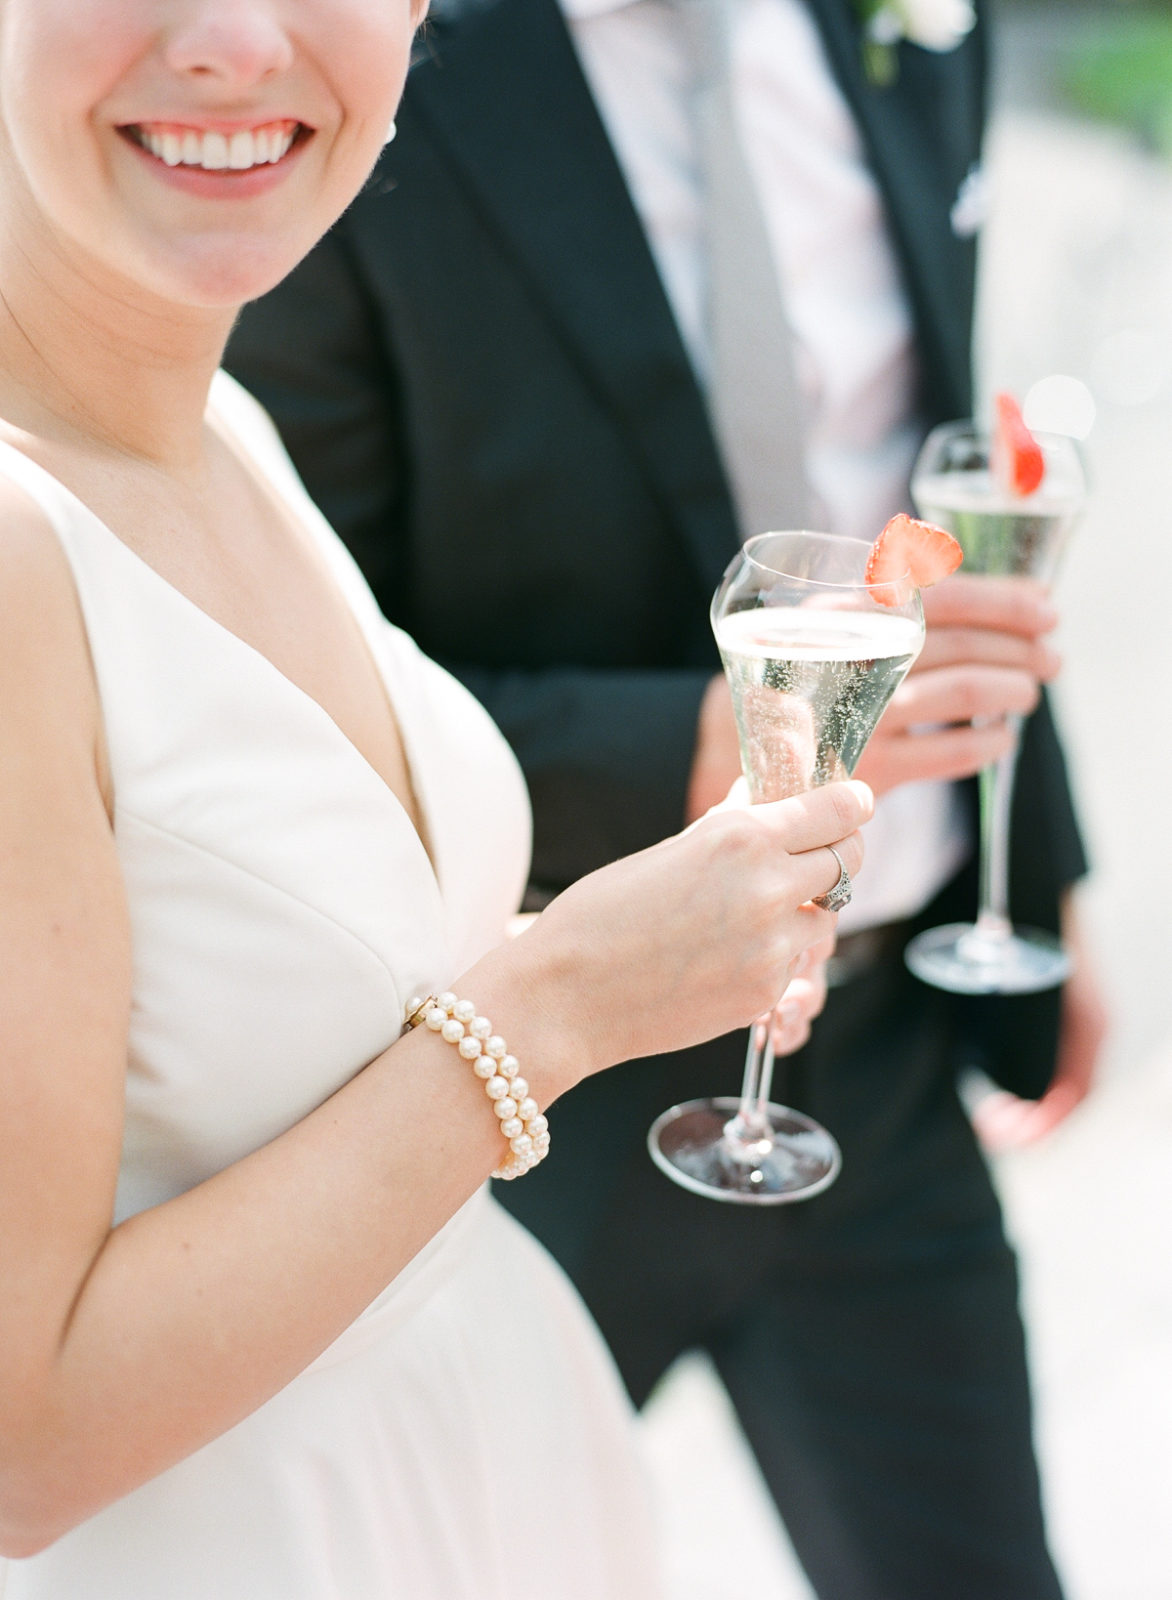 Ireland Film Photographer | Molly Carr Photography | Bride in White Jenny Yoo Wedding Gown and Pearls Toasting Champagne